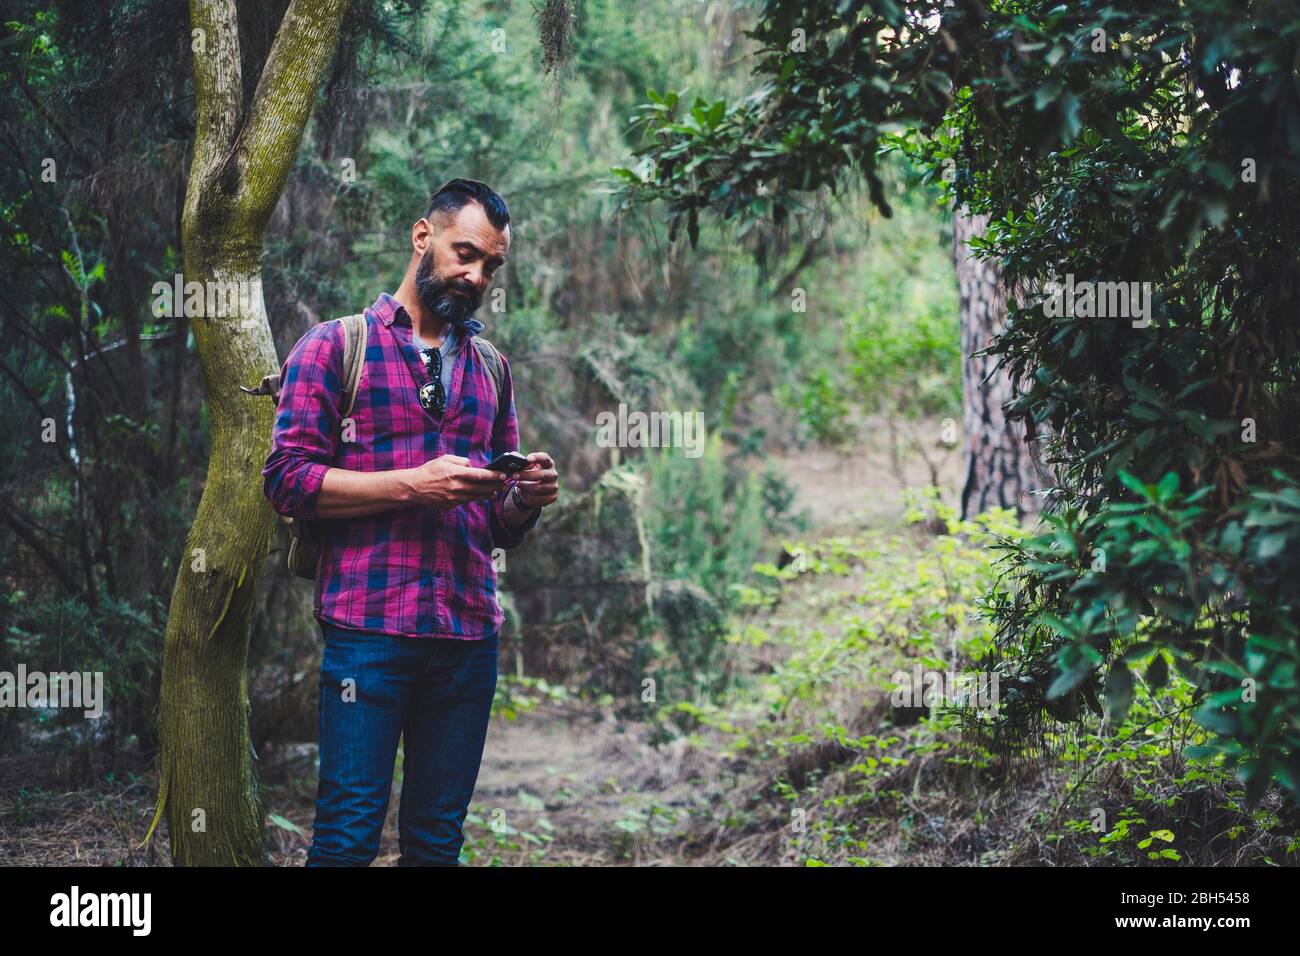 Man using smart phone in forest Stock Photo